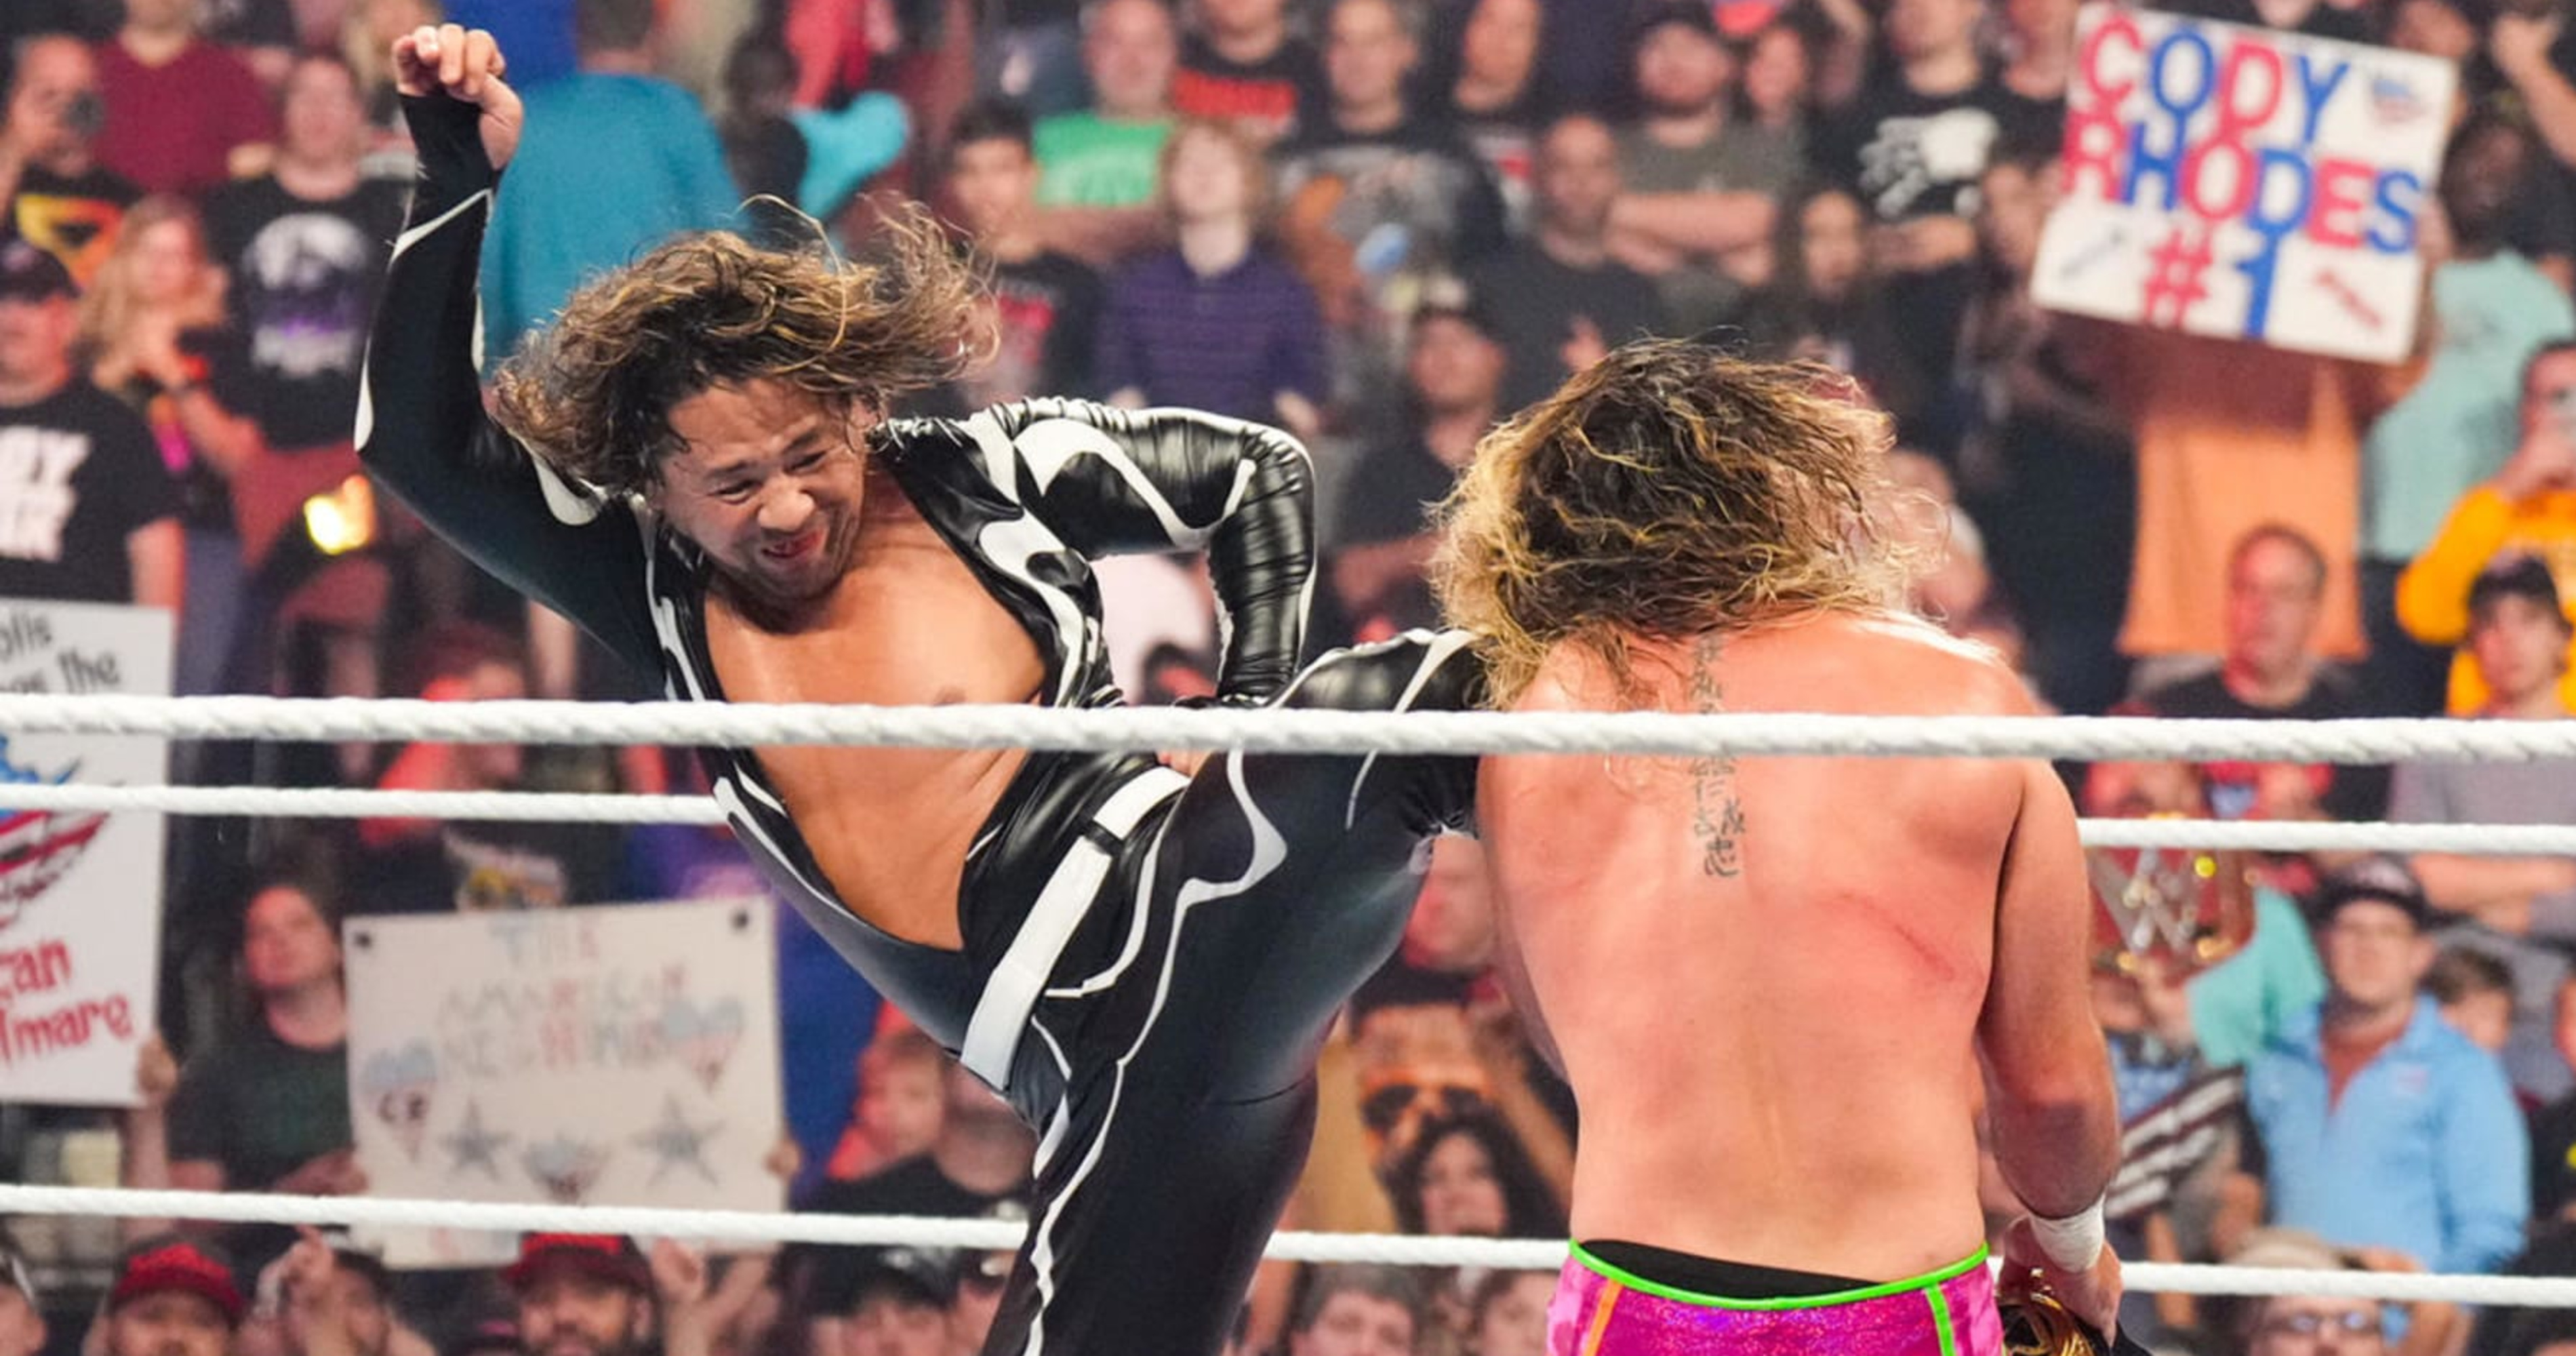 Feud With Seth Rollins Has Brought New Life to Shinsuke Nakamura in WWE, News, Scores, Highlights, Stats, and Rumors